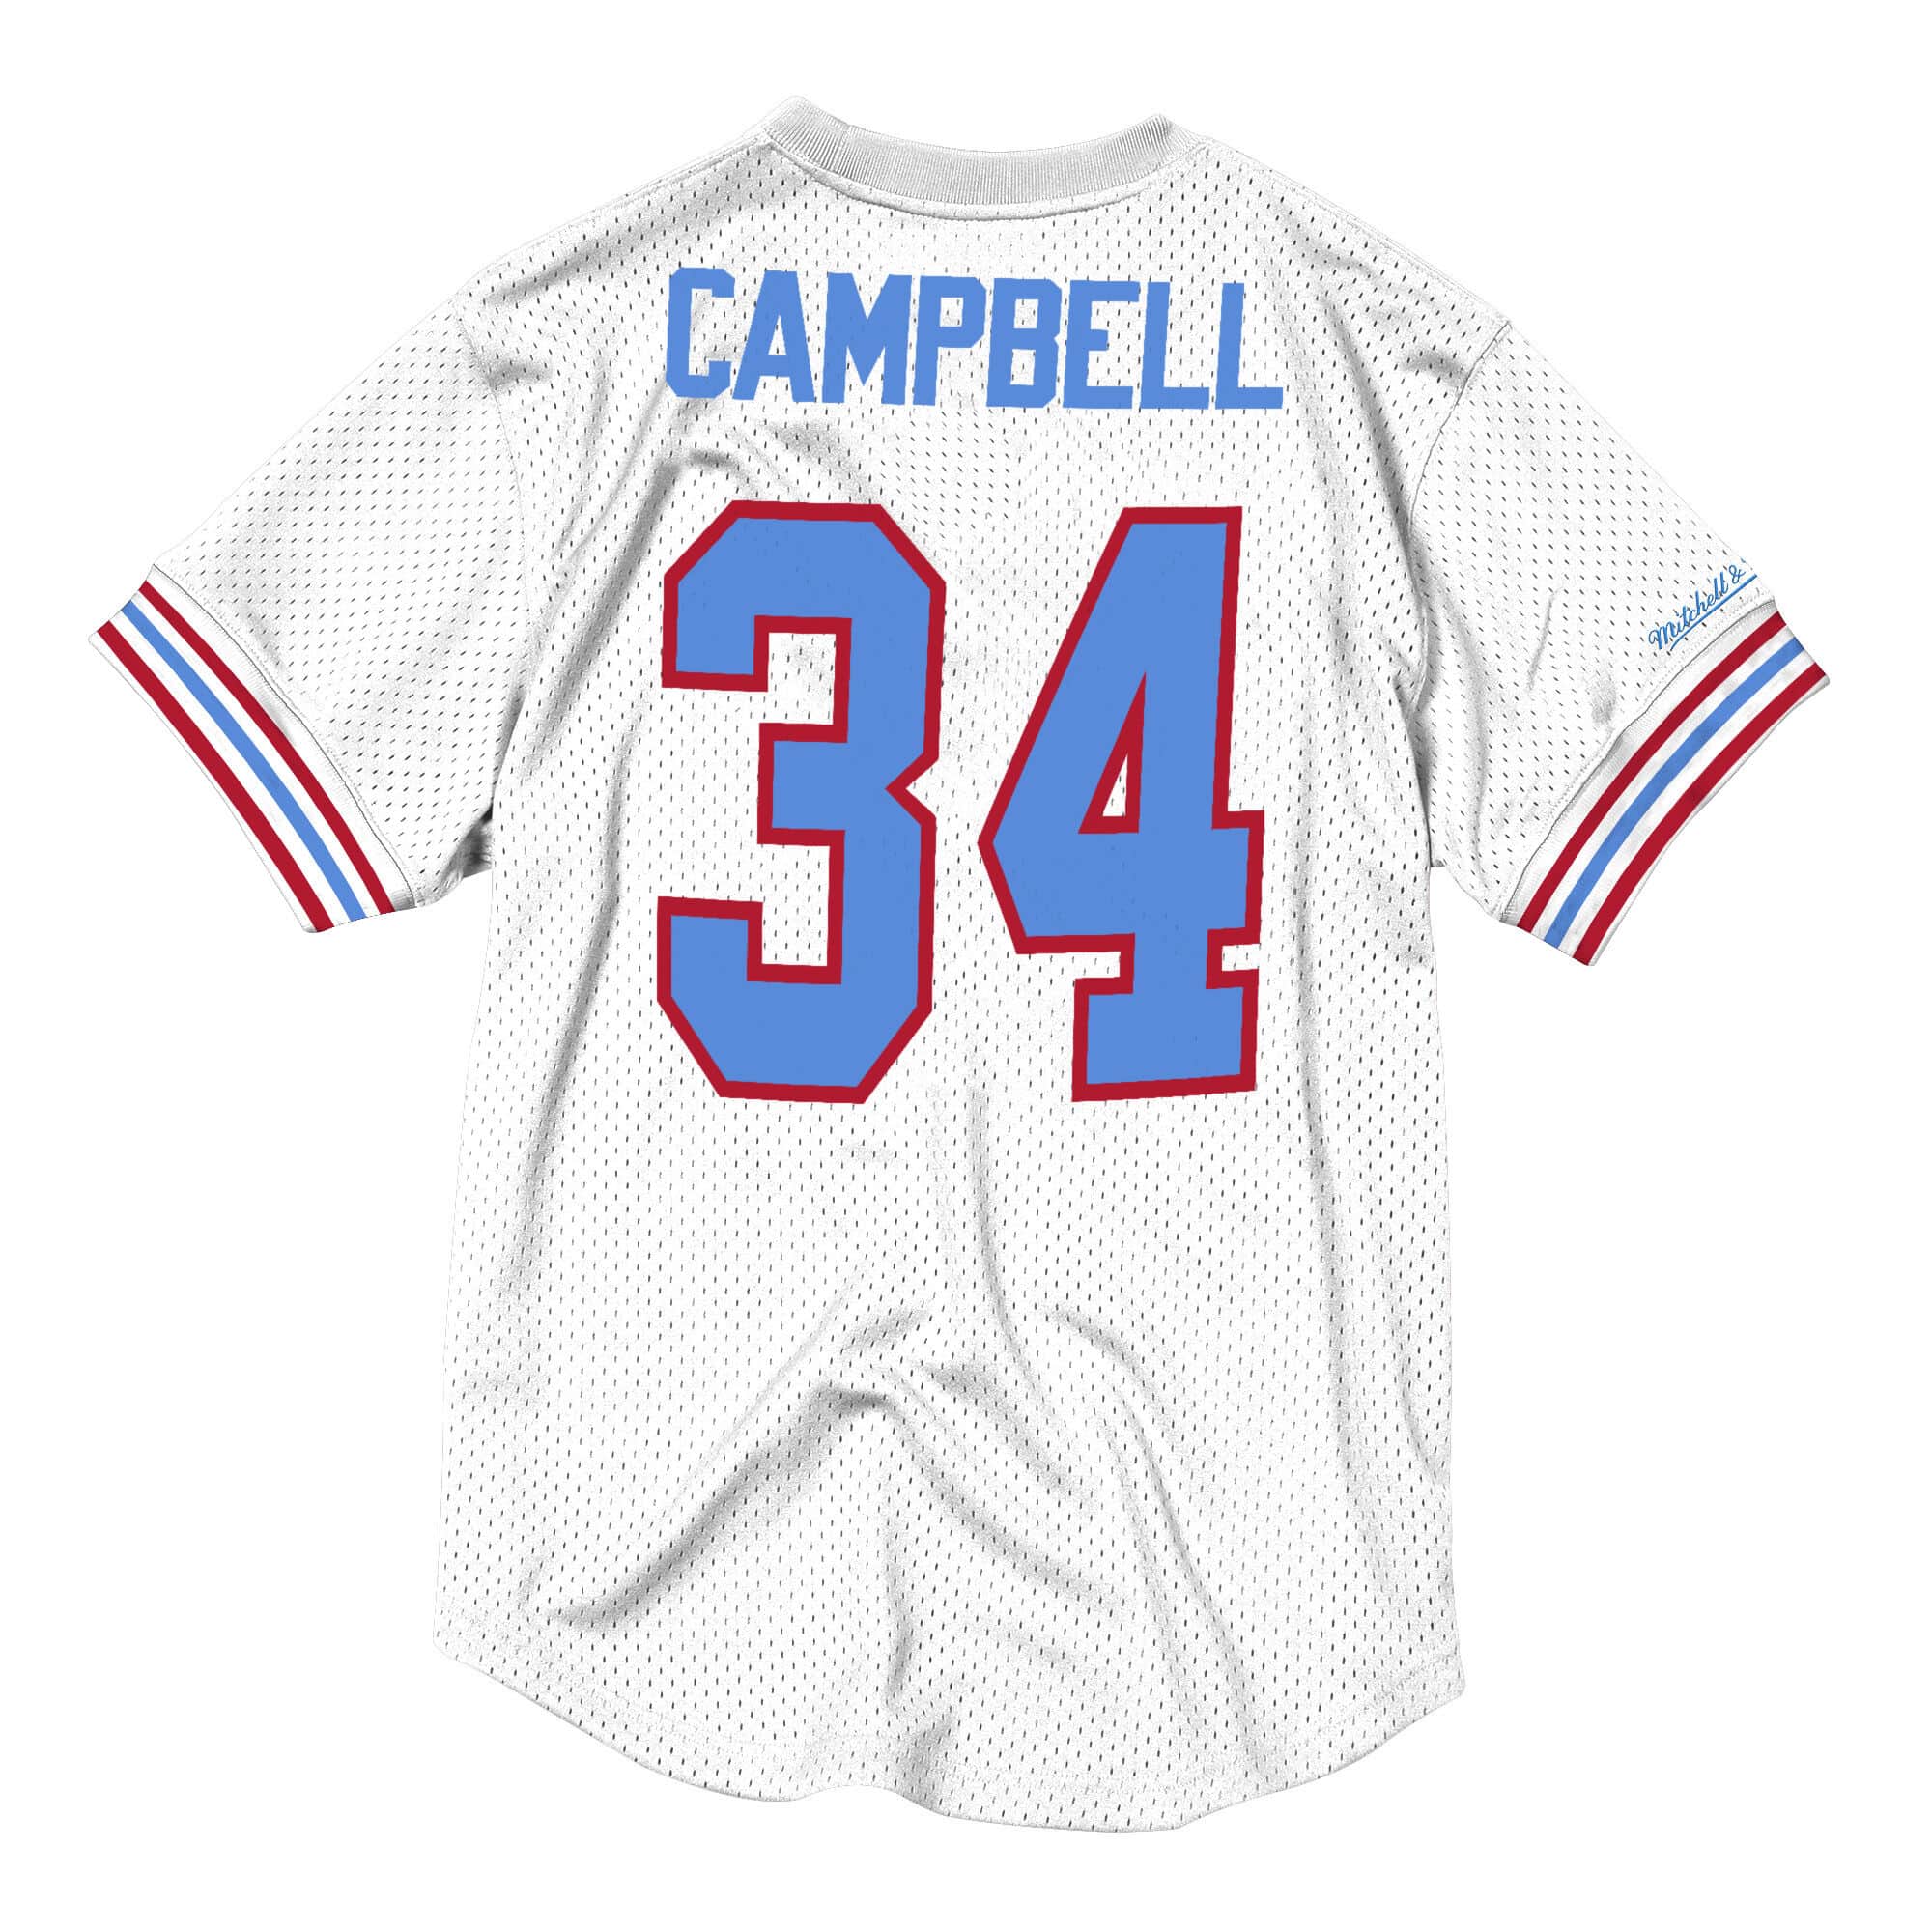 Name & Number Mesh Top Houston Oilers 1979 Earl Campbell